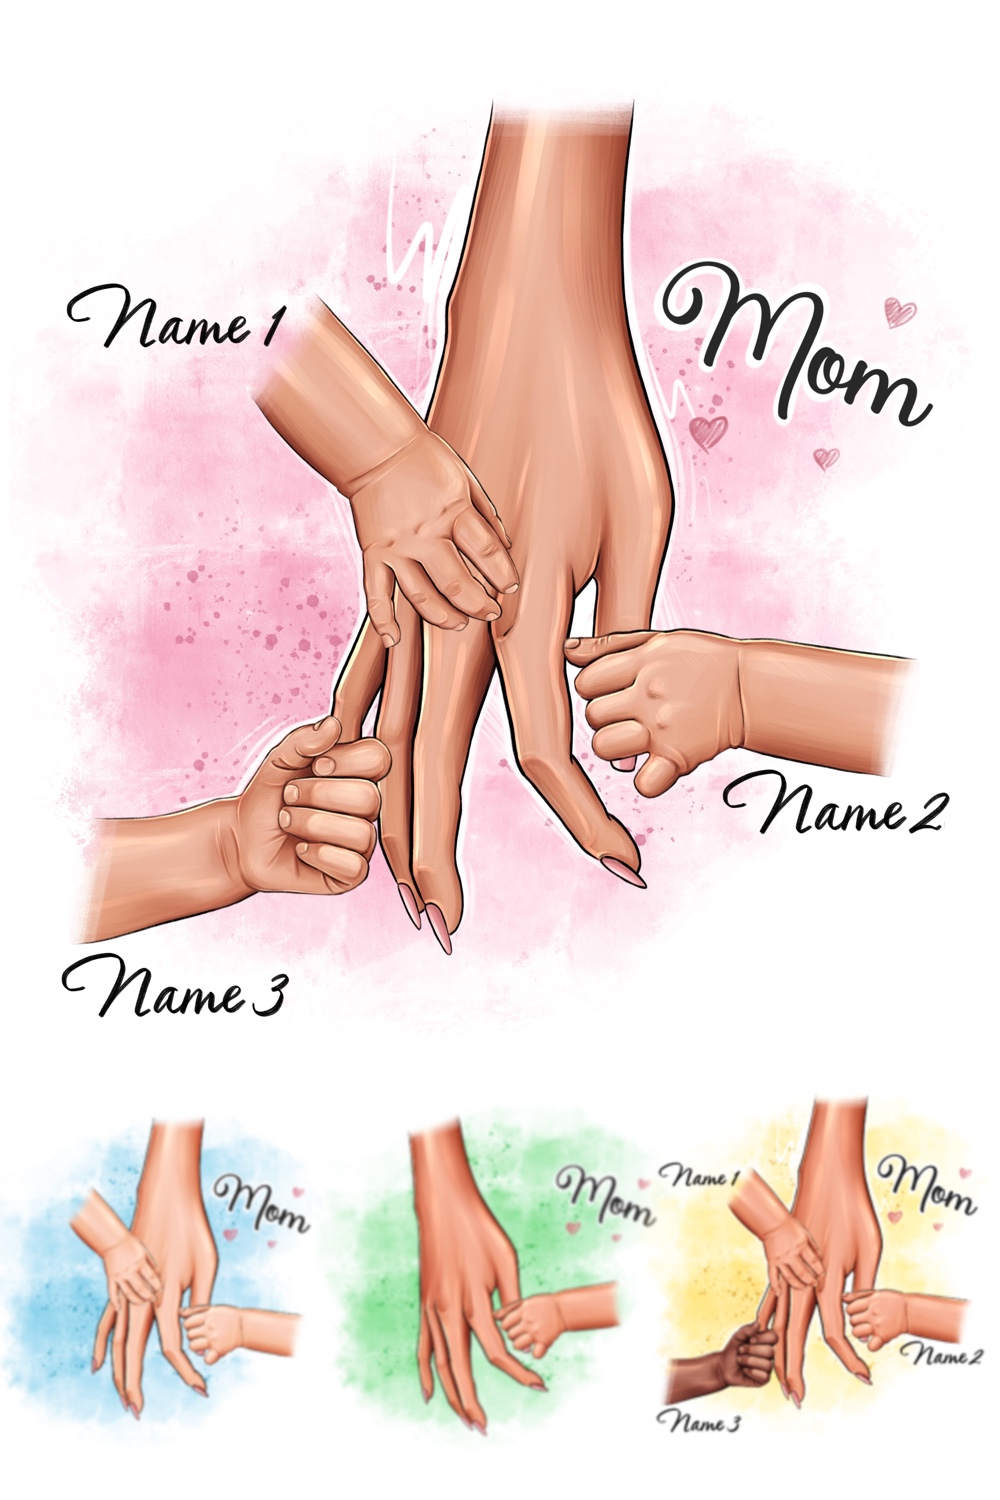 Mom And Dad With A Child Family Clipart Pinterest Image.